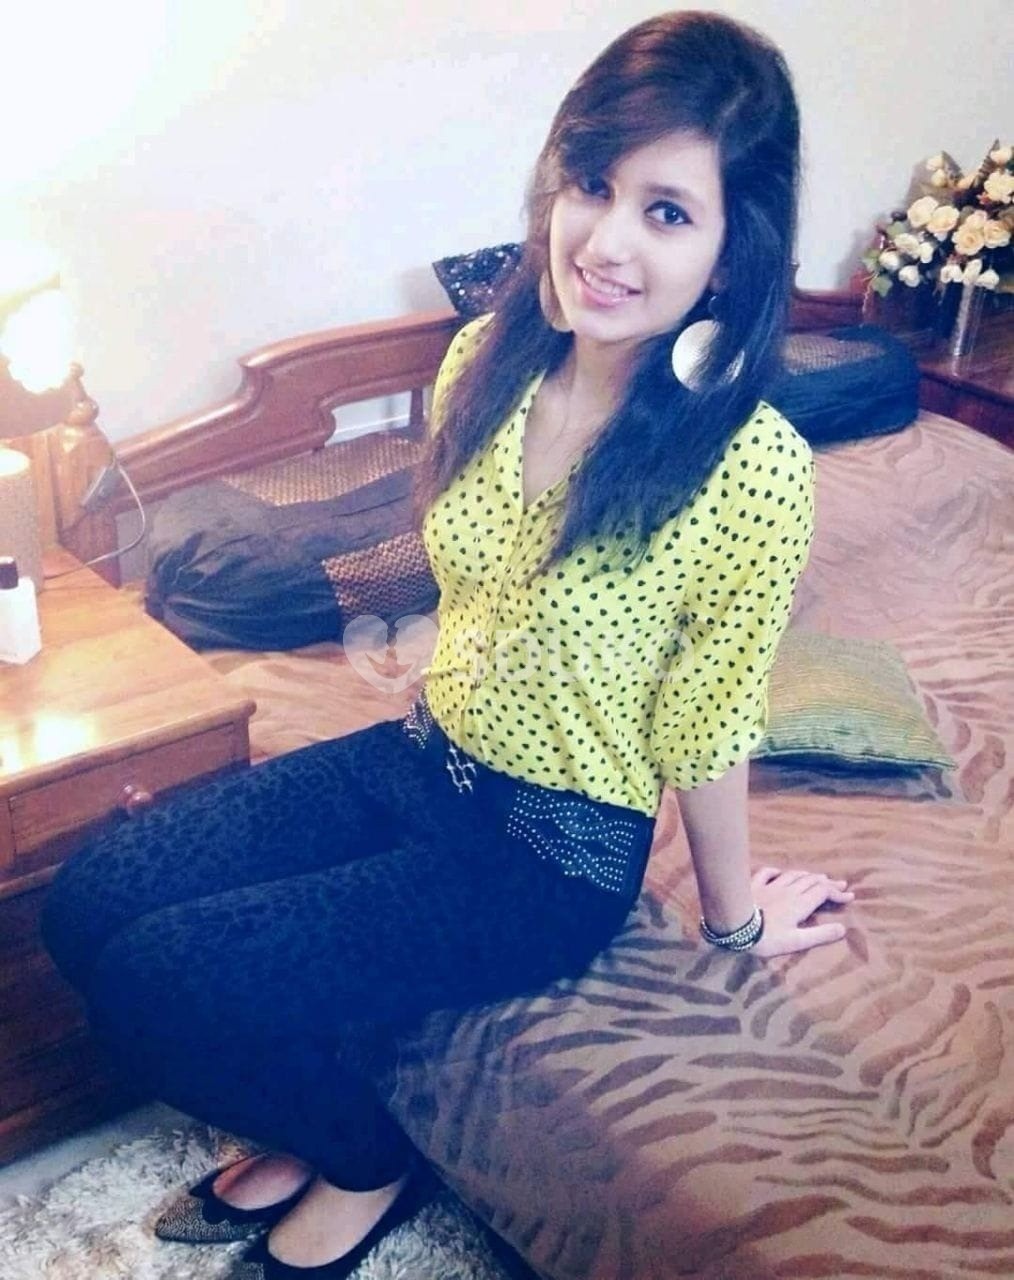 Call girl in kochi self and secure high profile girl available now